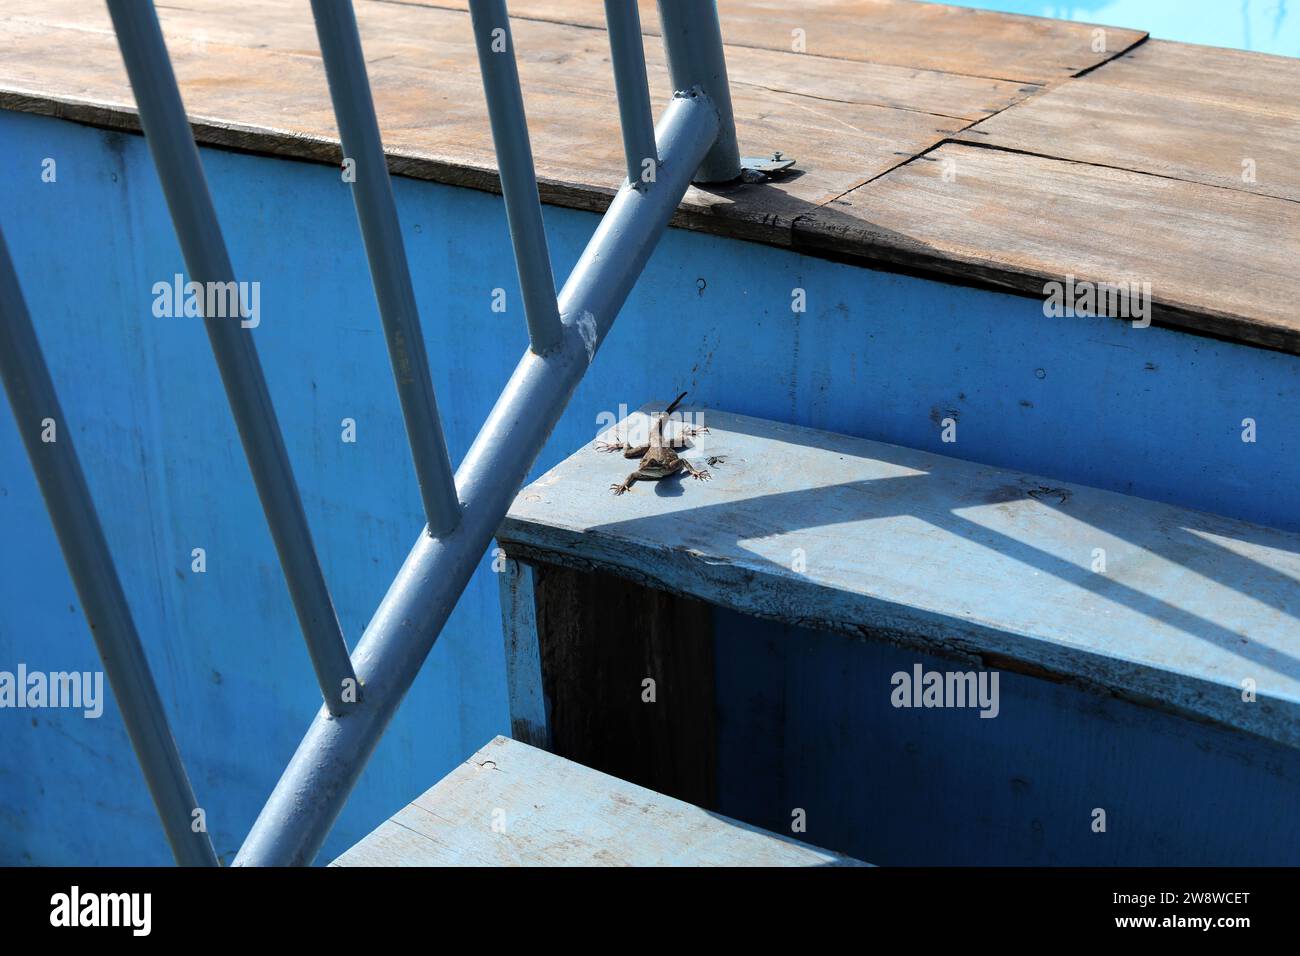 Lizard pictured on the steps to a swimming pool in Freetown, Sierra Leone, Africa. Stock Photo